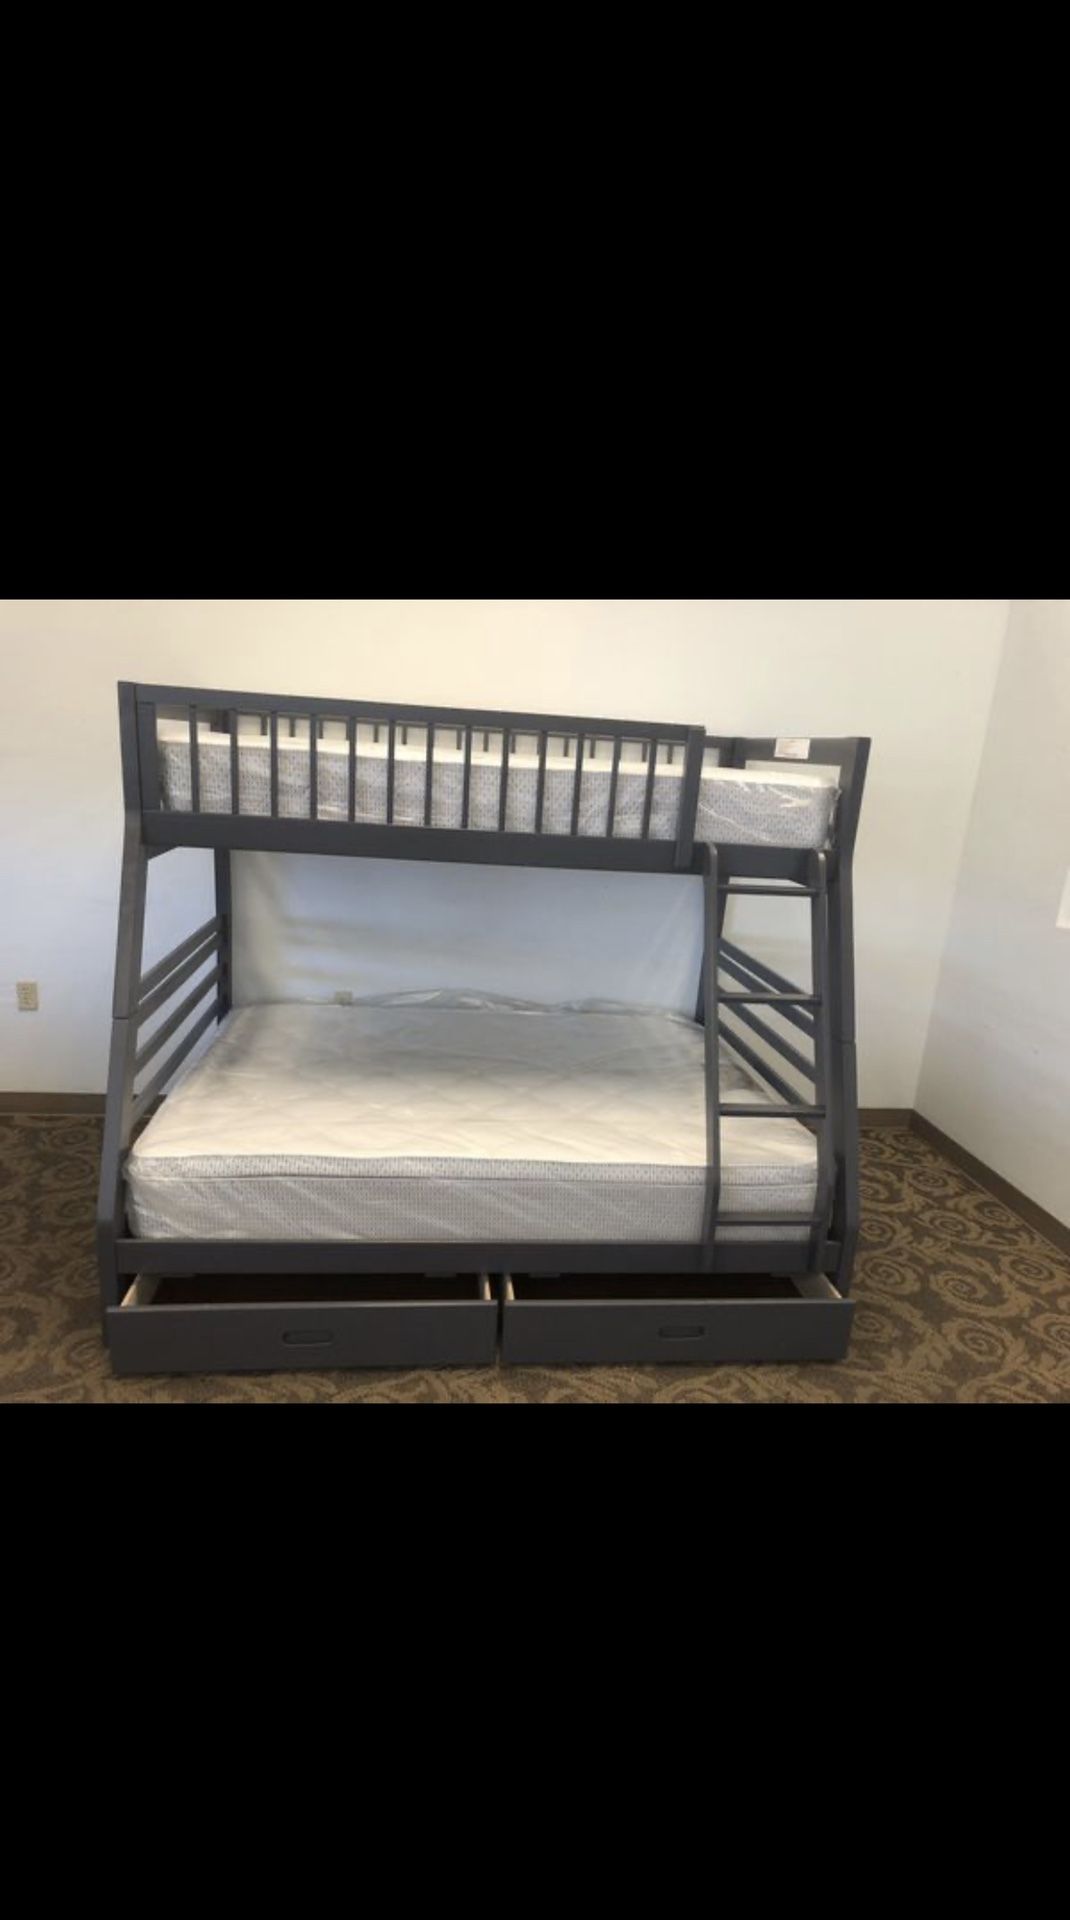 Bunk bed full/twin with mattress brand new in box